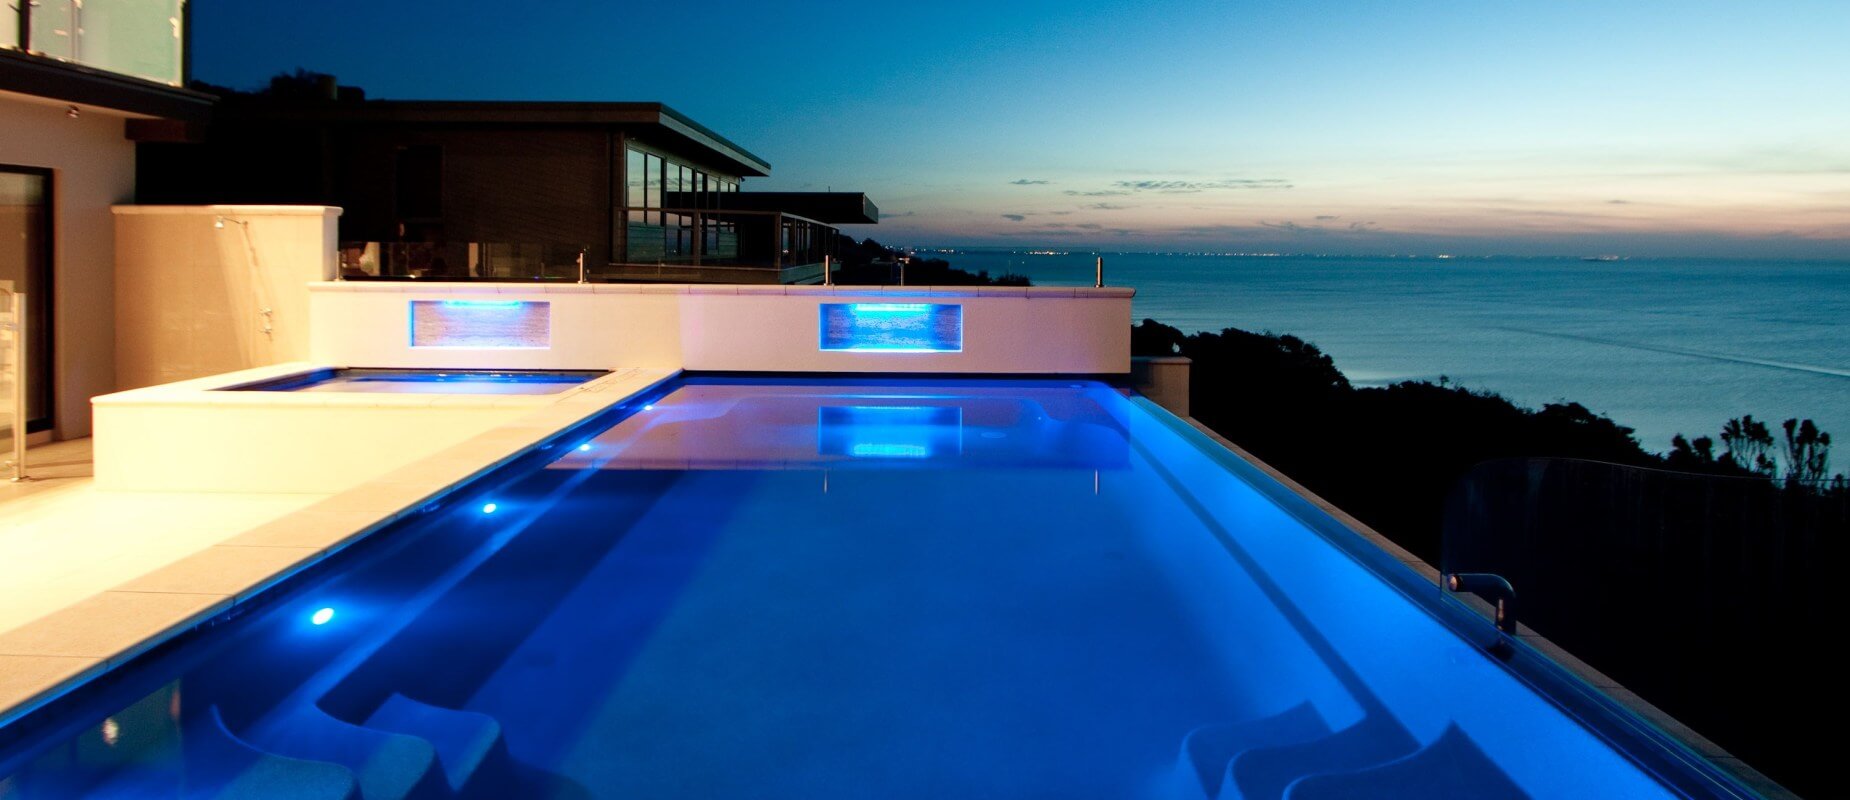 Compass-Pools-Australia_X-Trainer-infinity-pool-with-a-spa-and-pool-lights-on